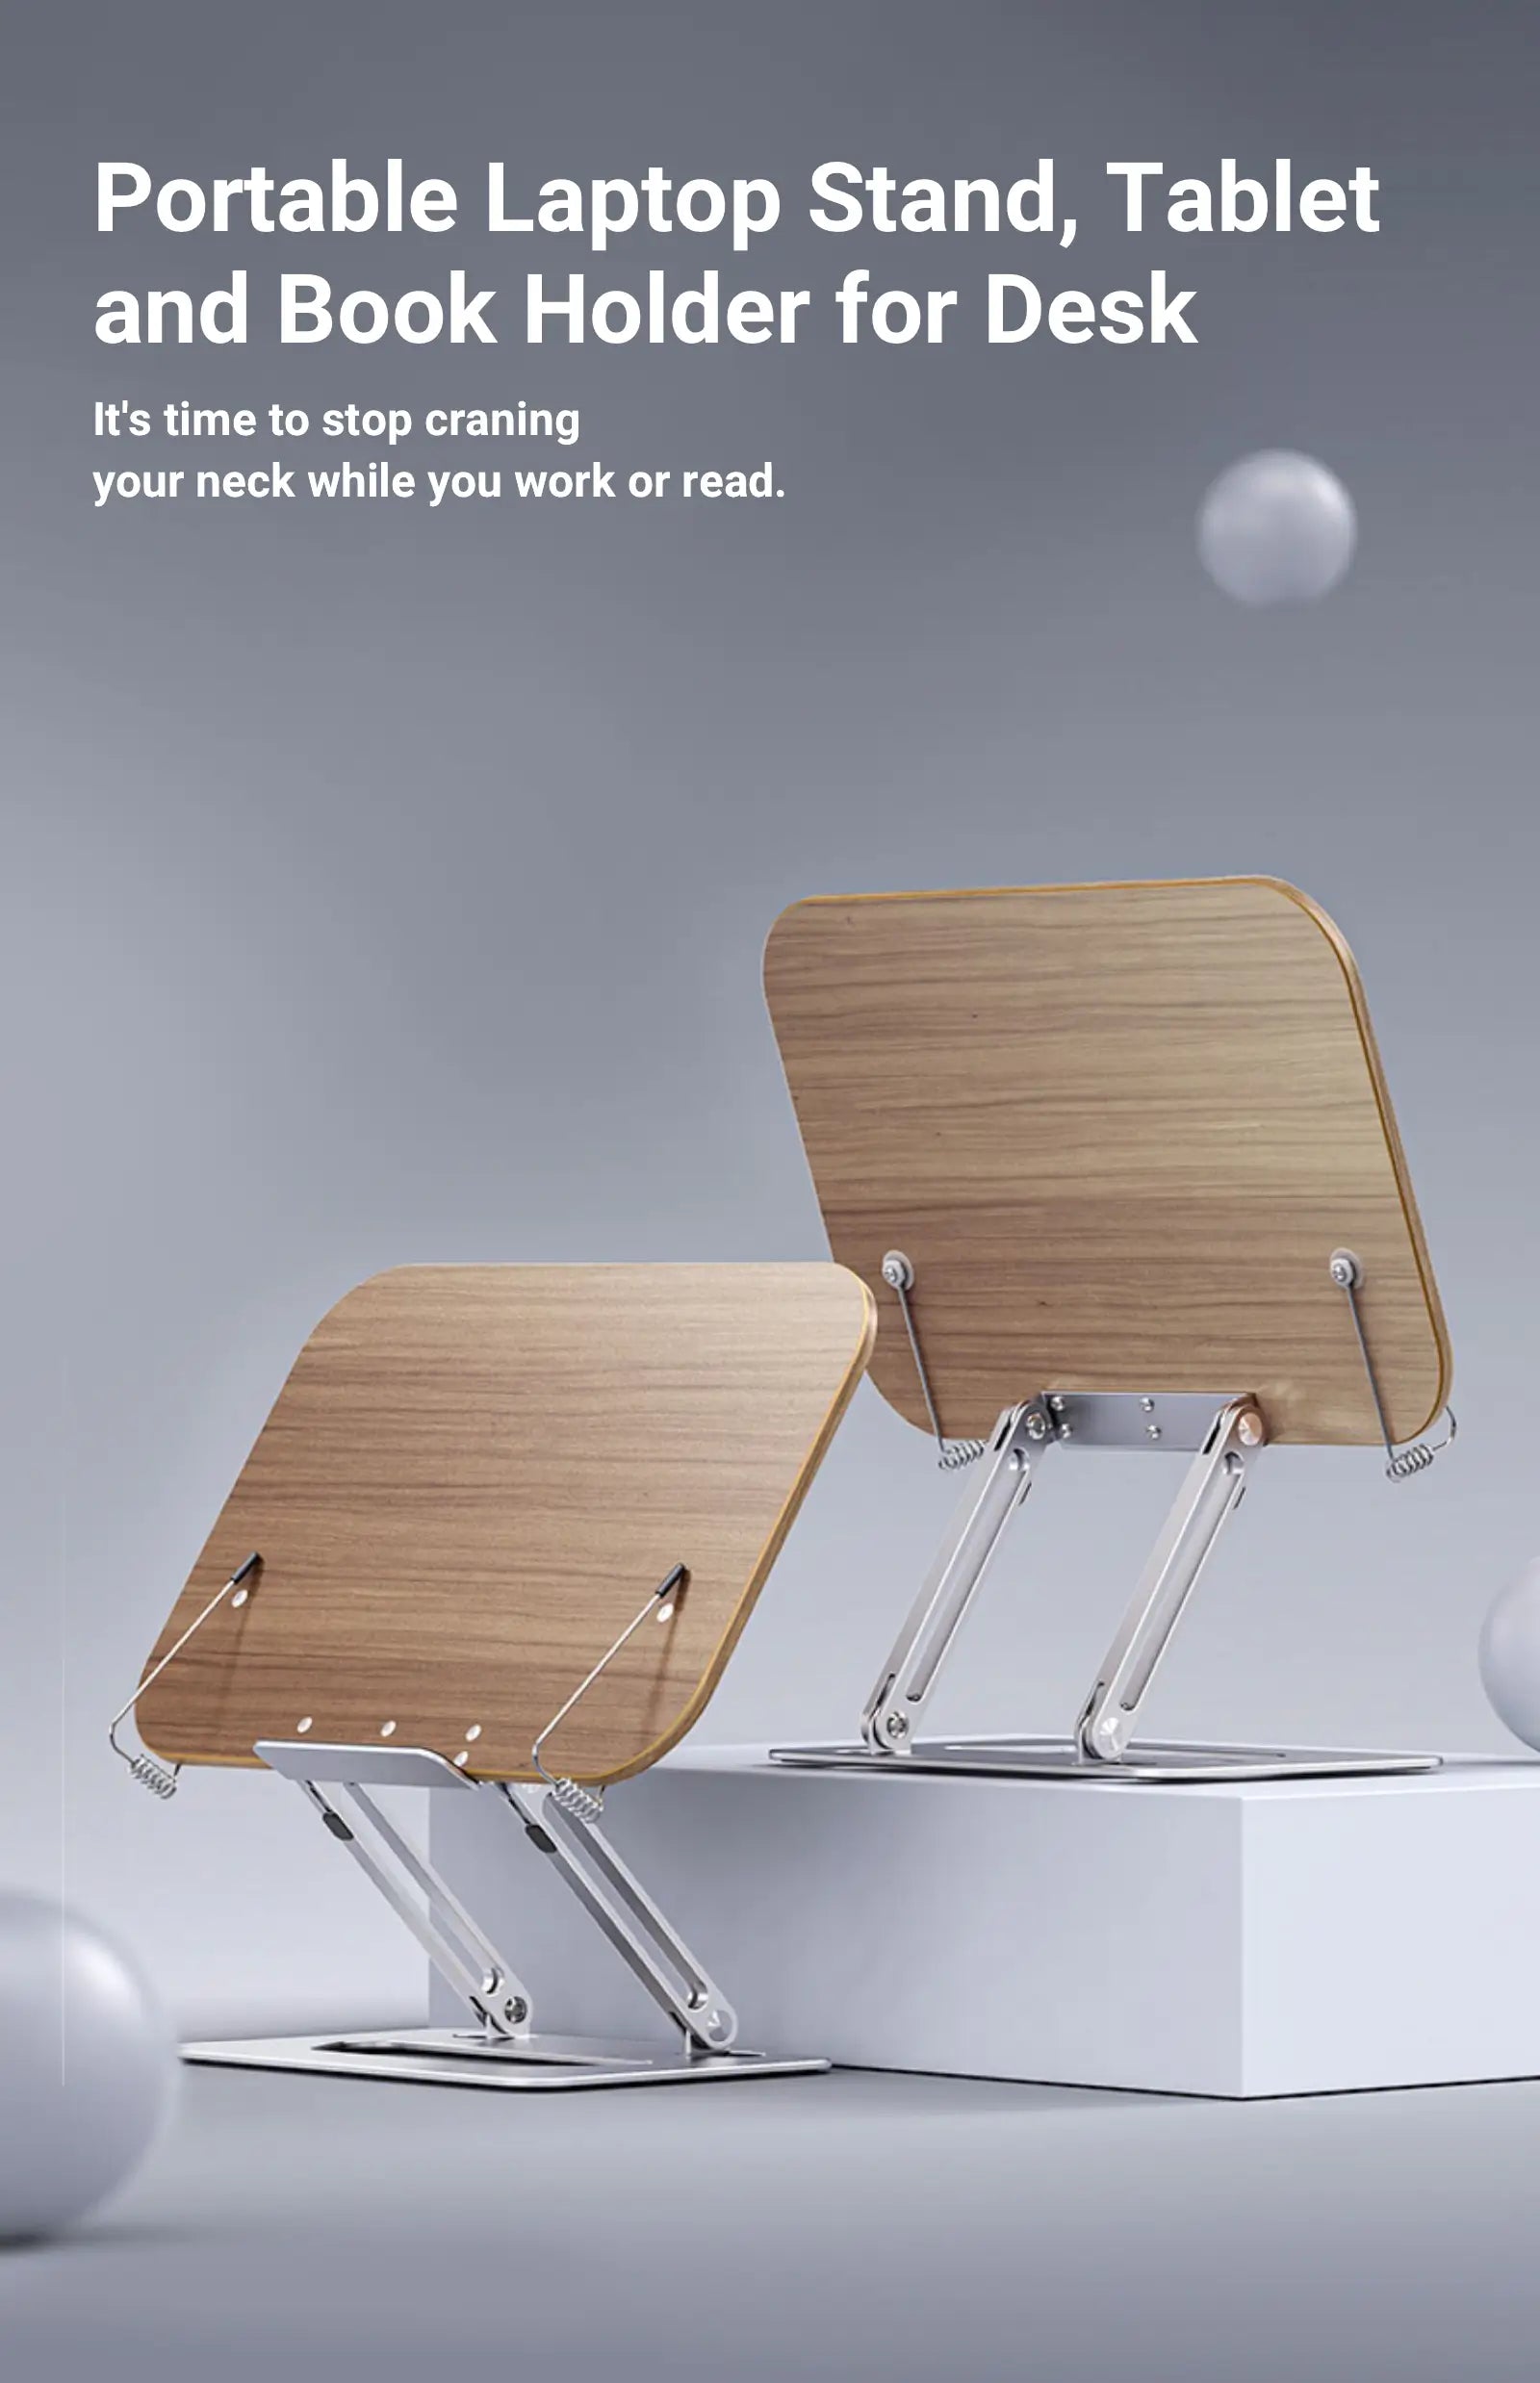 Portable Laptop Stand Tablet and Book Holder for Desk